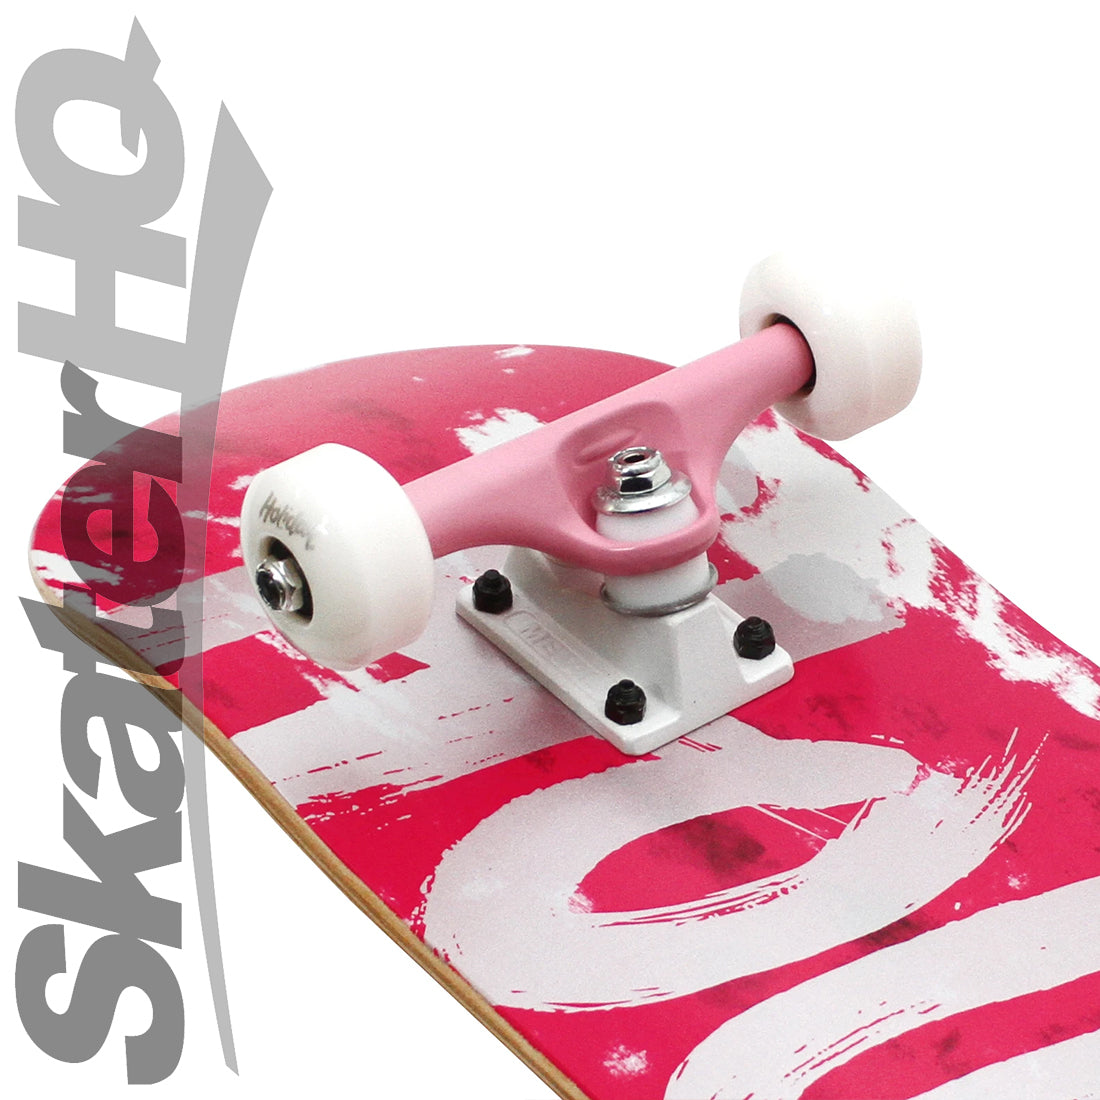 Holiday Tie Dye 7.5 Complete - Pink/Silver Skateboard Completes Modern Street